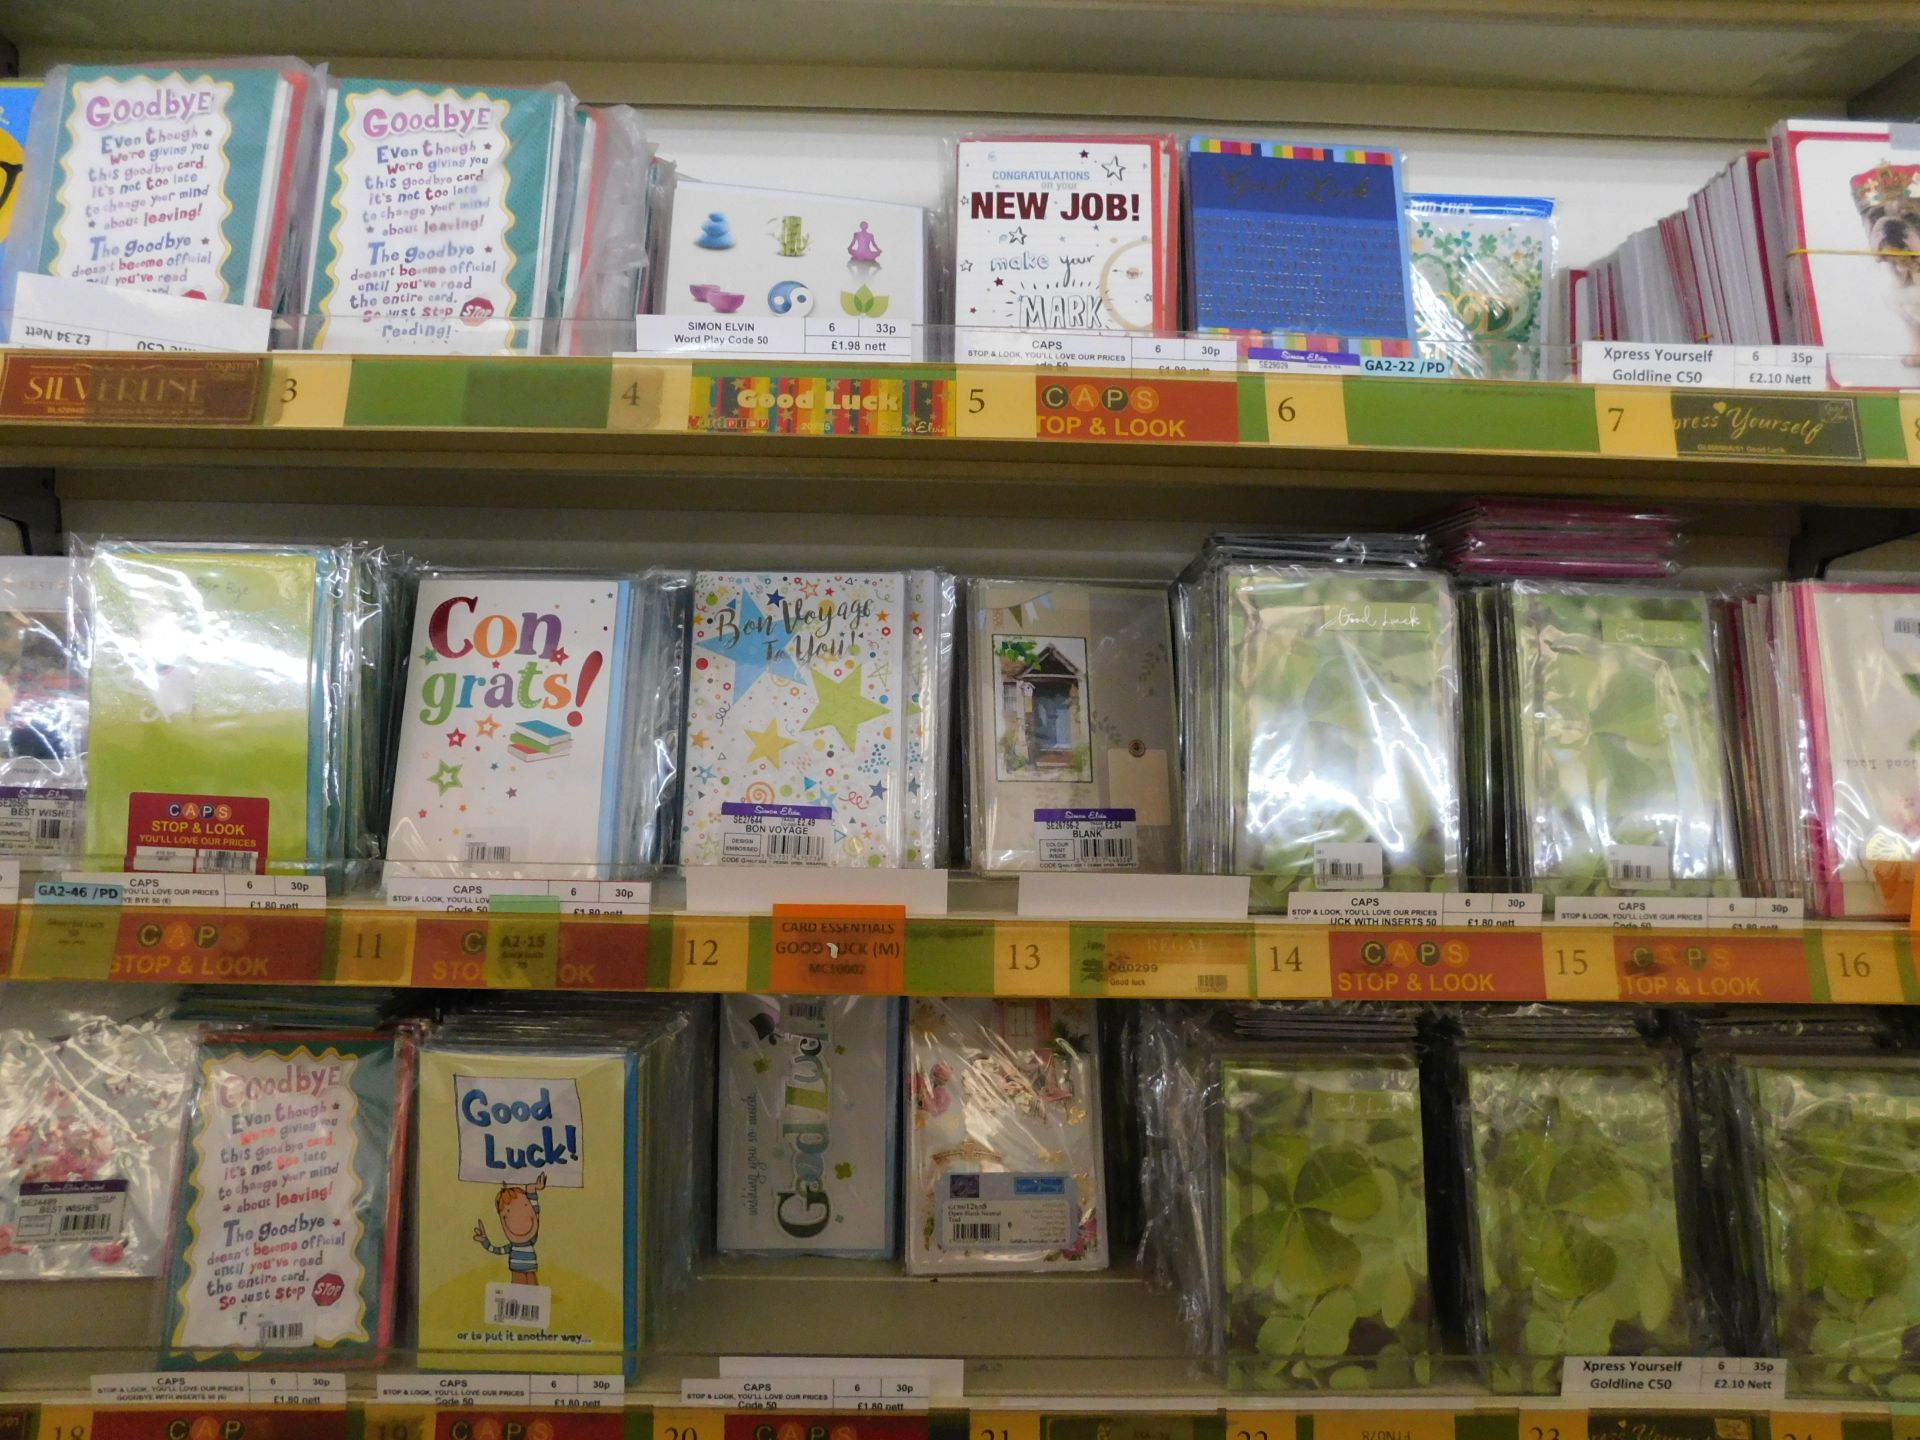 Approximately 23,500 Wedding Occasions & Celebrations Greeting Cards (Packs of 6) (Location Bury. - Image 8 of 18